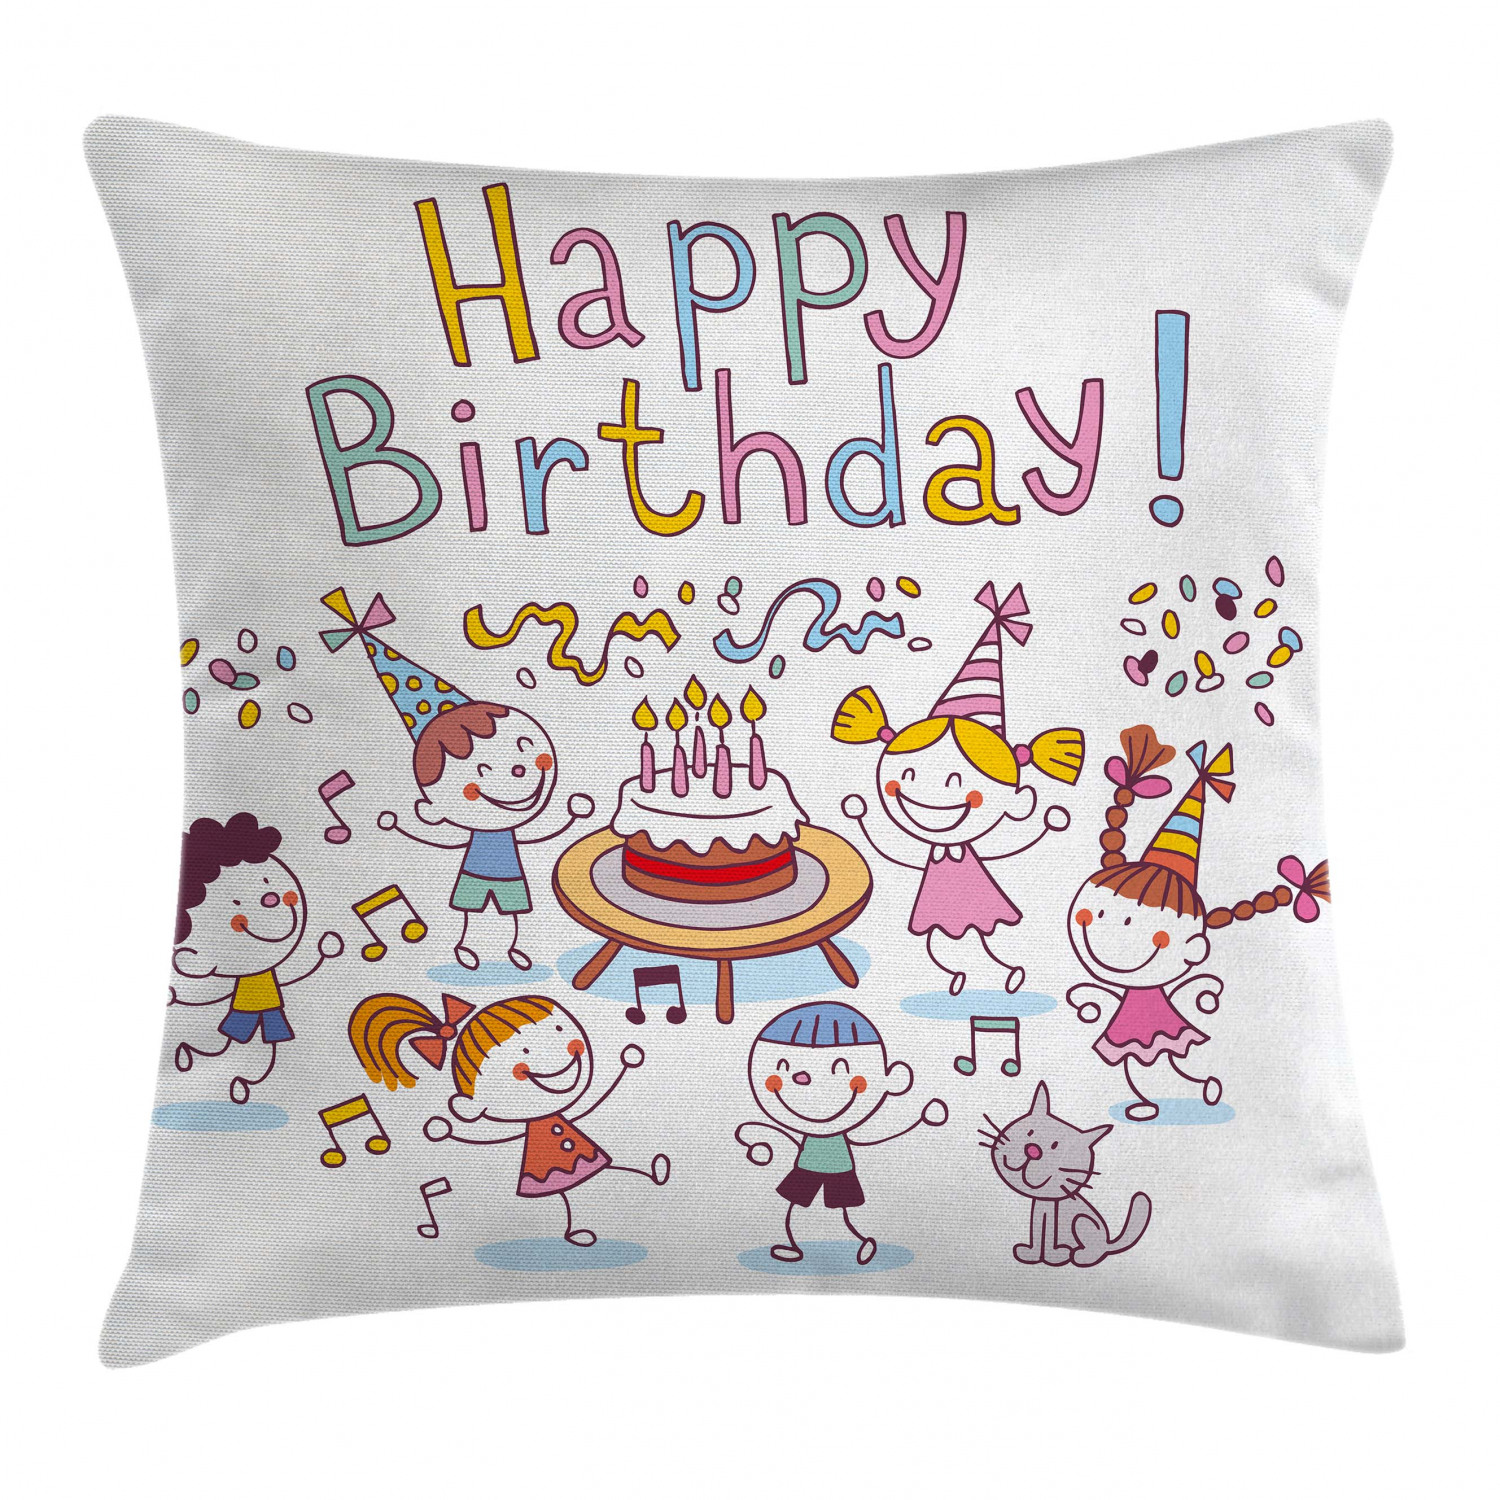 Birthday Fabric Throw Pillow Cases Cushion Covers Home Decor 8 Sizes 